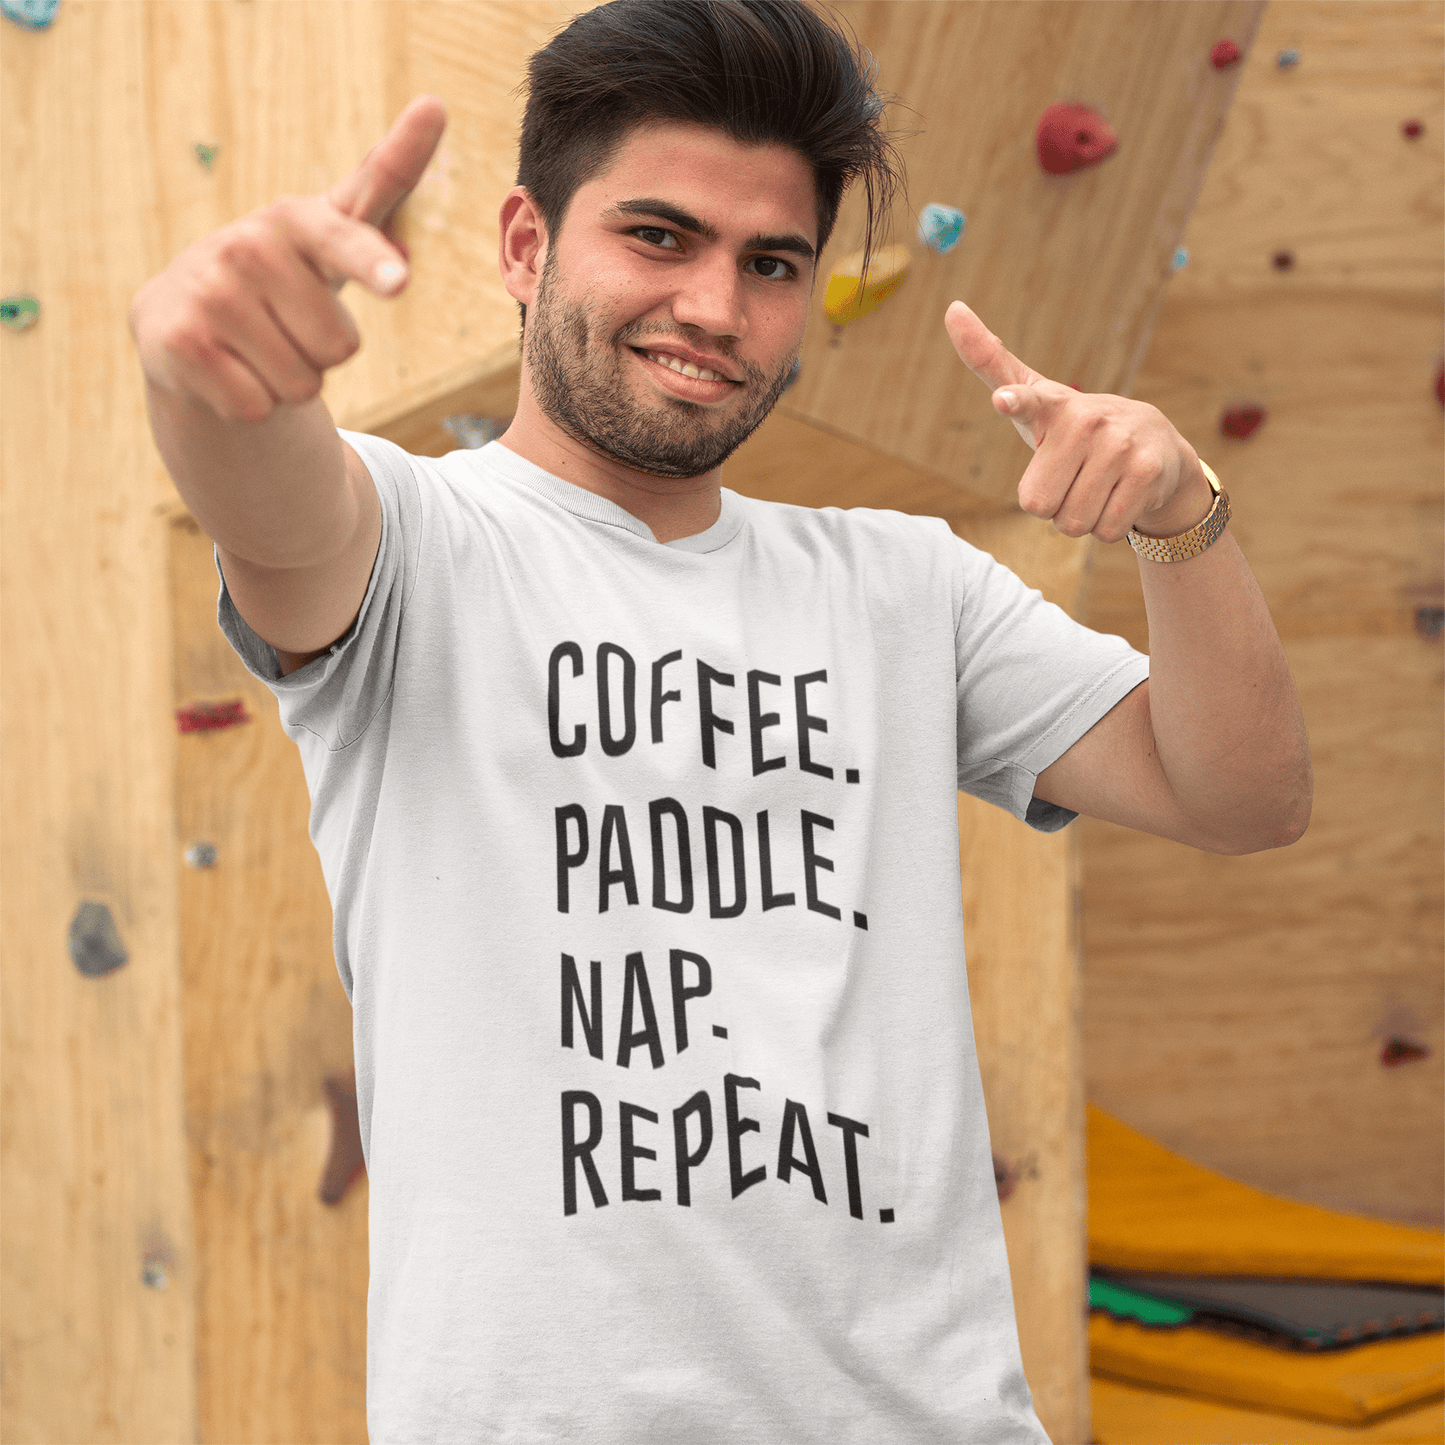 COFFEE PADDLE NAP REPEAT Men's Short Sleeve Round Neck T-shirt 00058